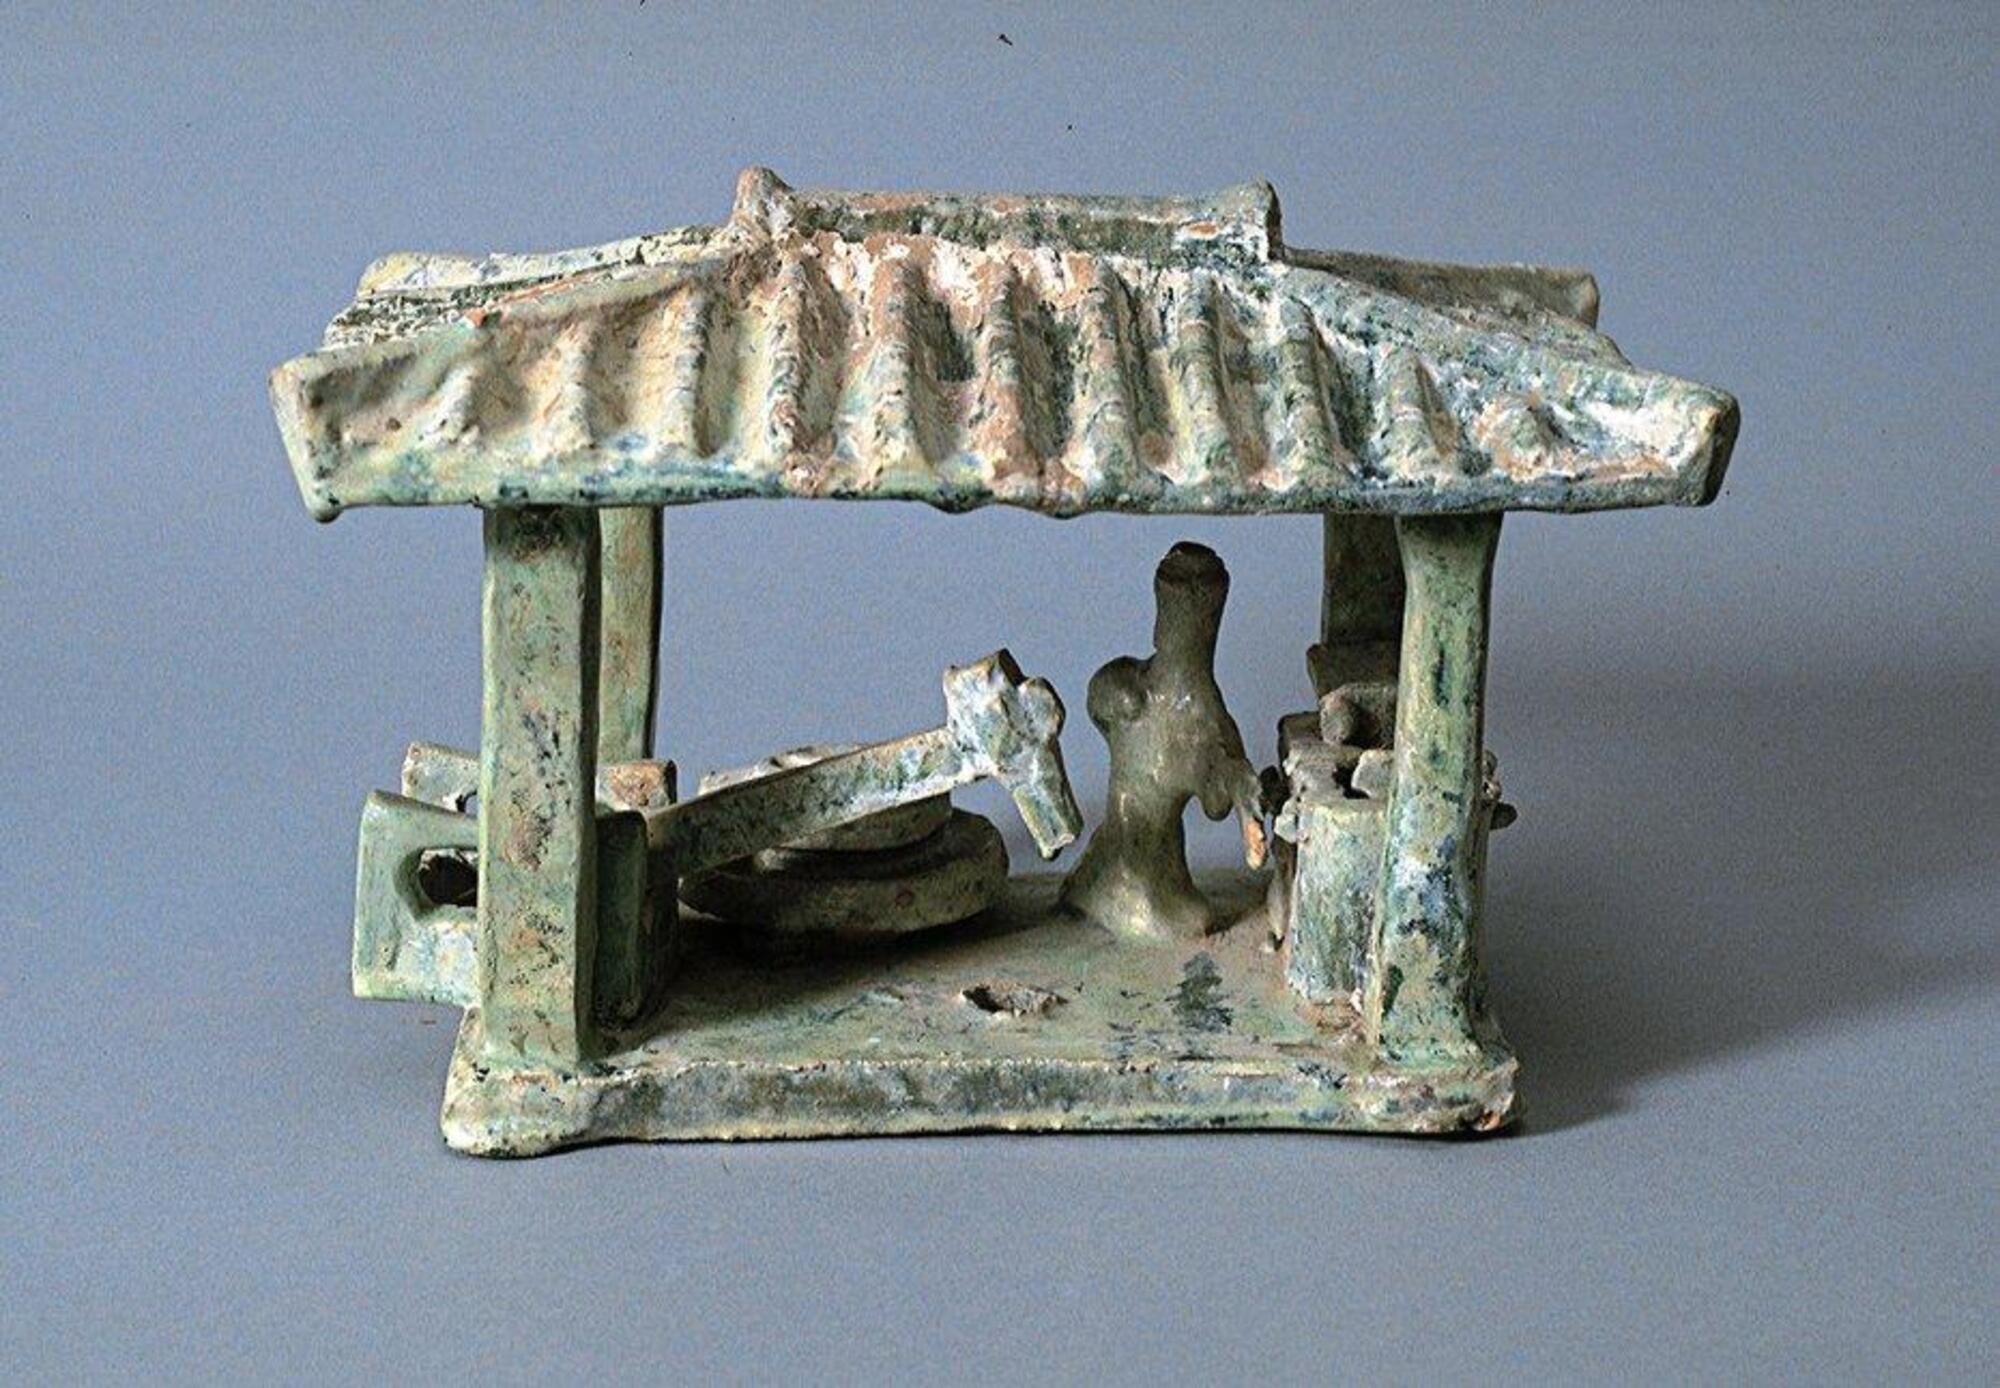 This model of a hulling mill consists of a treadle operated tilted pole connecting to a hammer that crushes the grain, with an operator and storage bins. It sits below a four-posted one-bay structure with a hipped roof with ridge lines, imitating contemporary tiled roofs. The model is covered in a green lead glaze with iridescence and calcification.